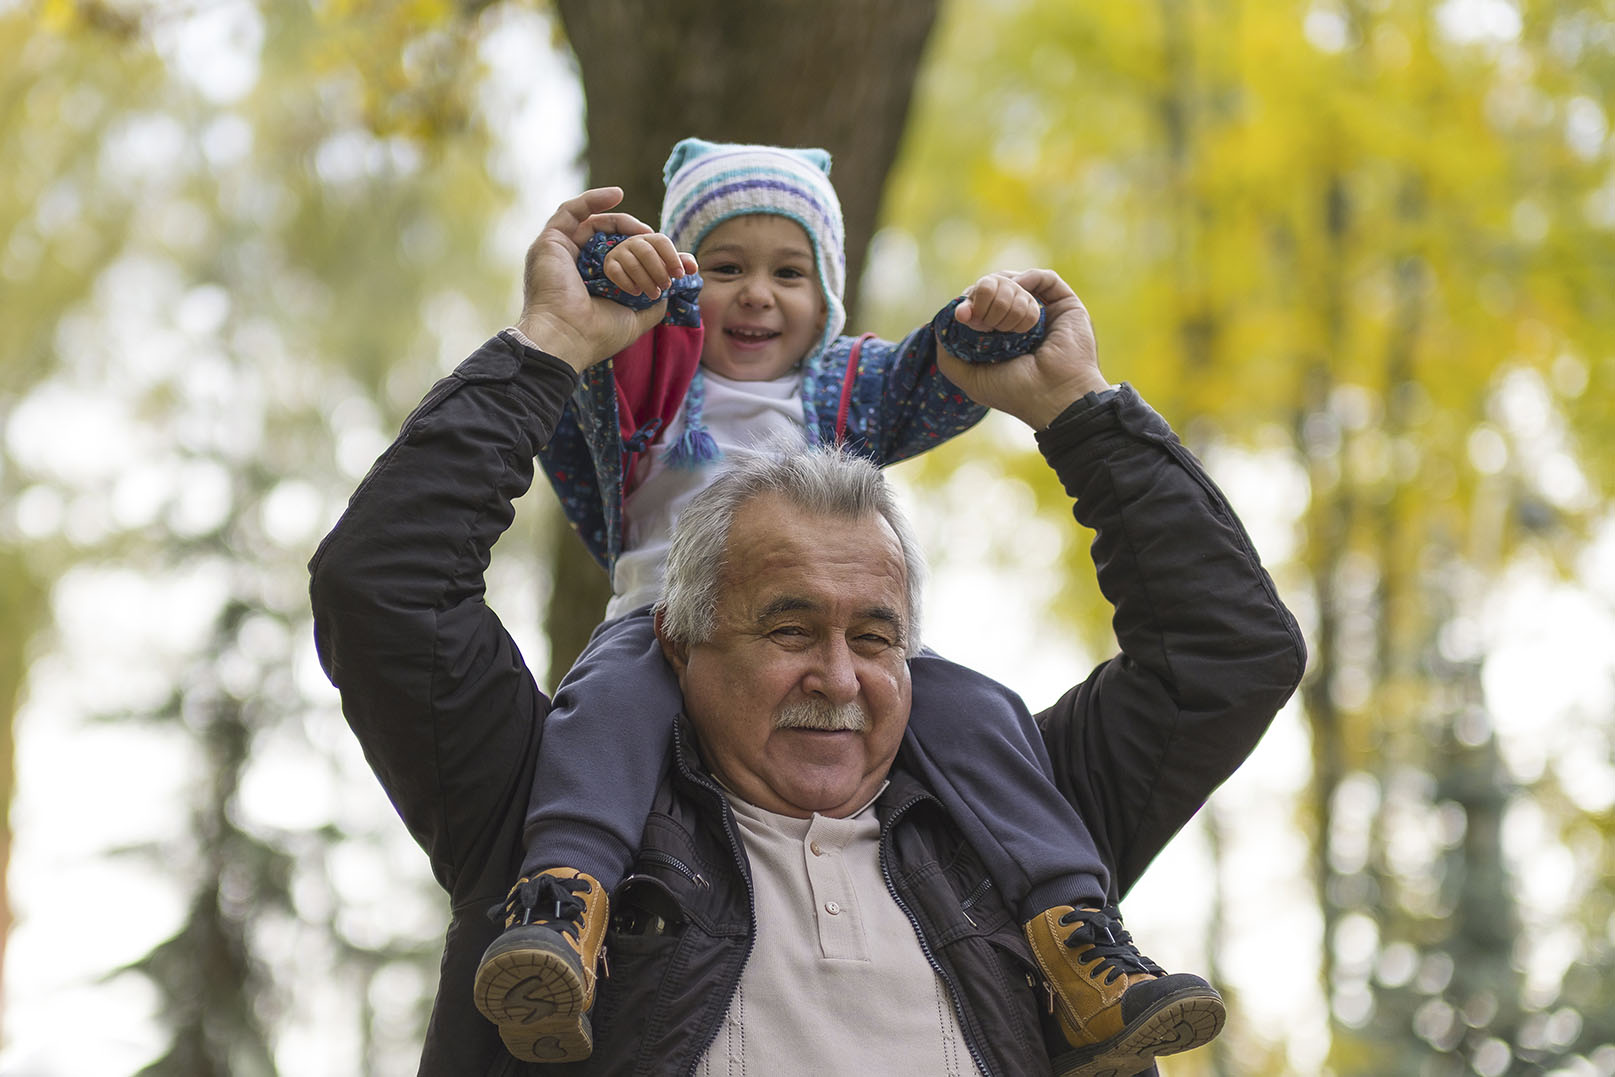 older man with small child on his shoulders both smiling and looking at camera